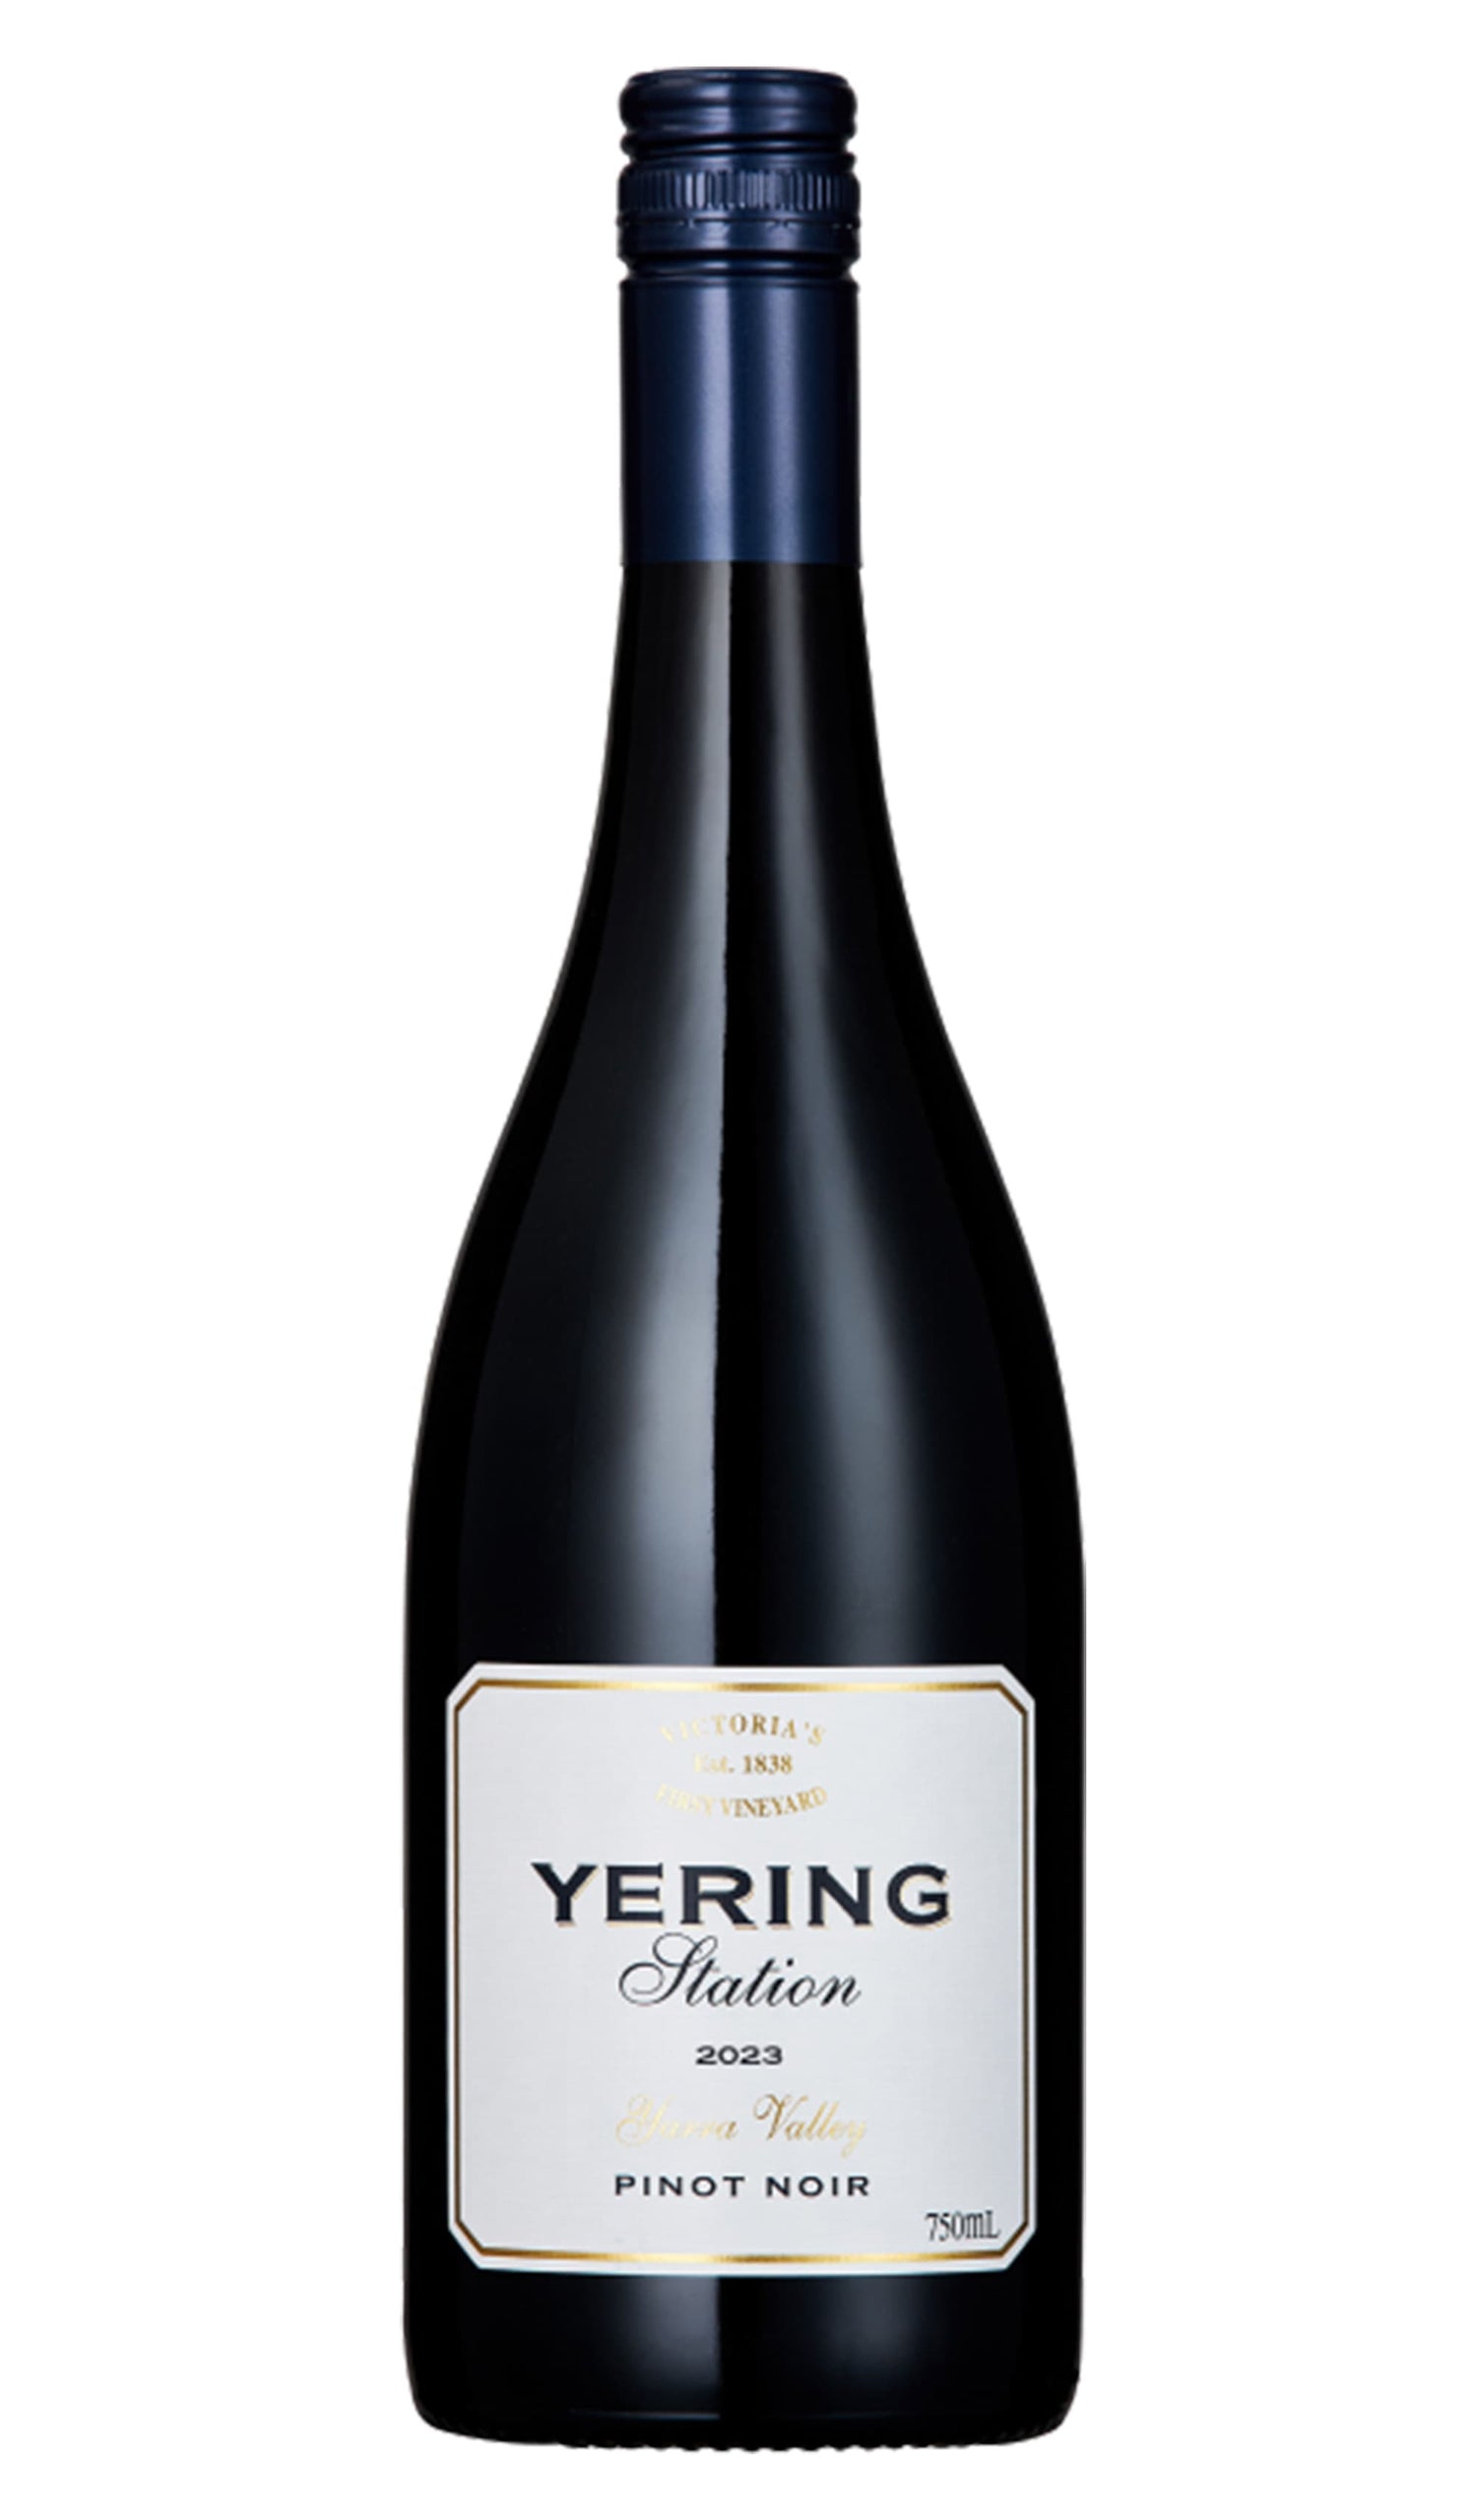 Find out more or buy Yering Station Yarra Valley Pinot Noir 2023 online at Wine Sellers Direct - Australia’s independent liquor specialists.